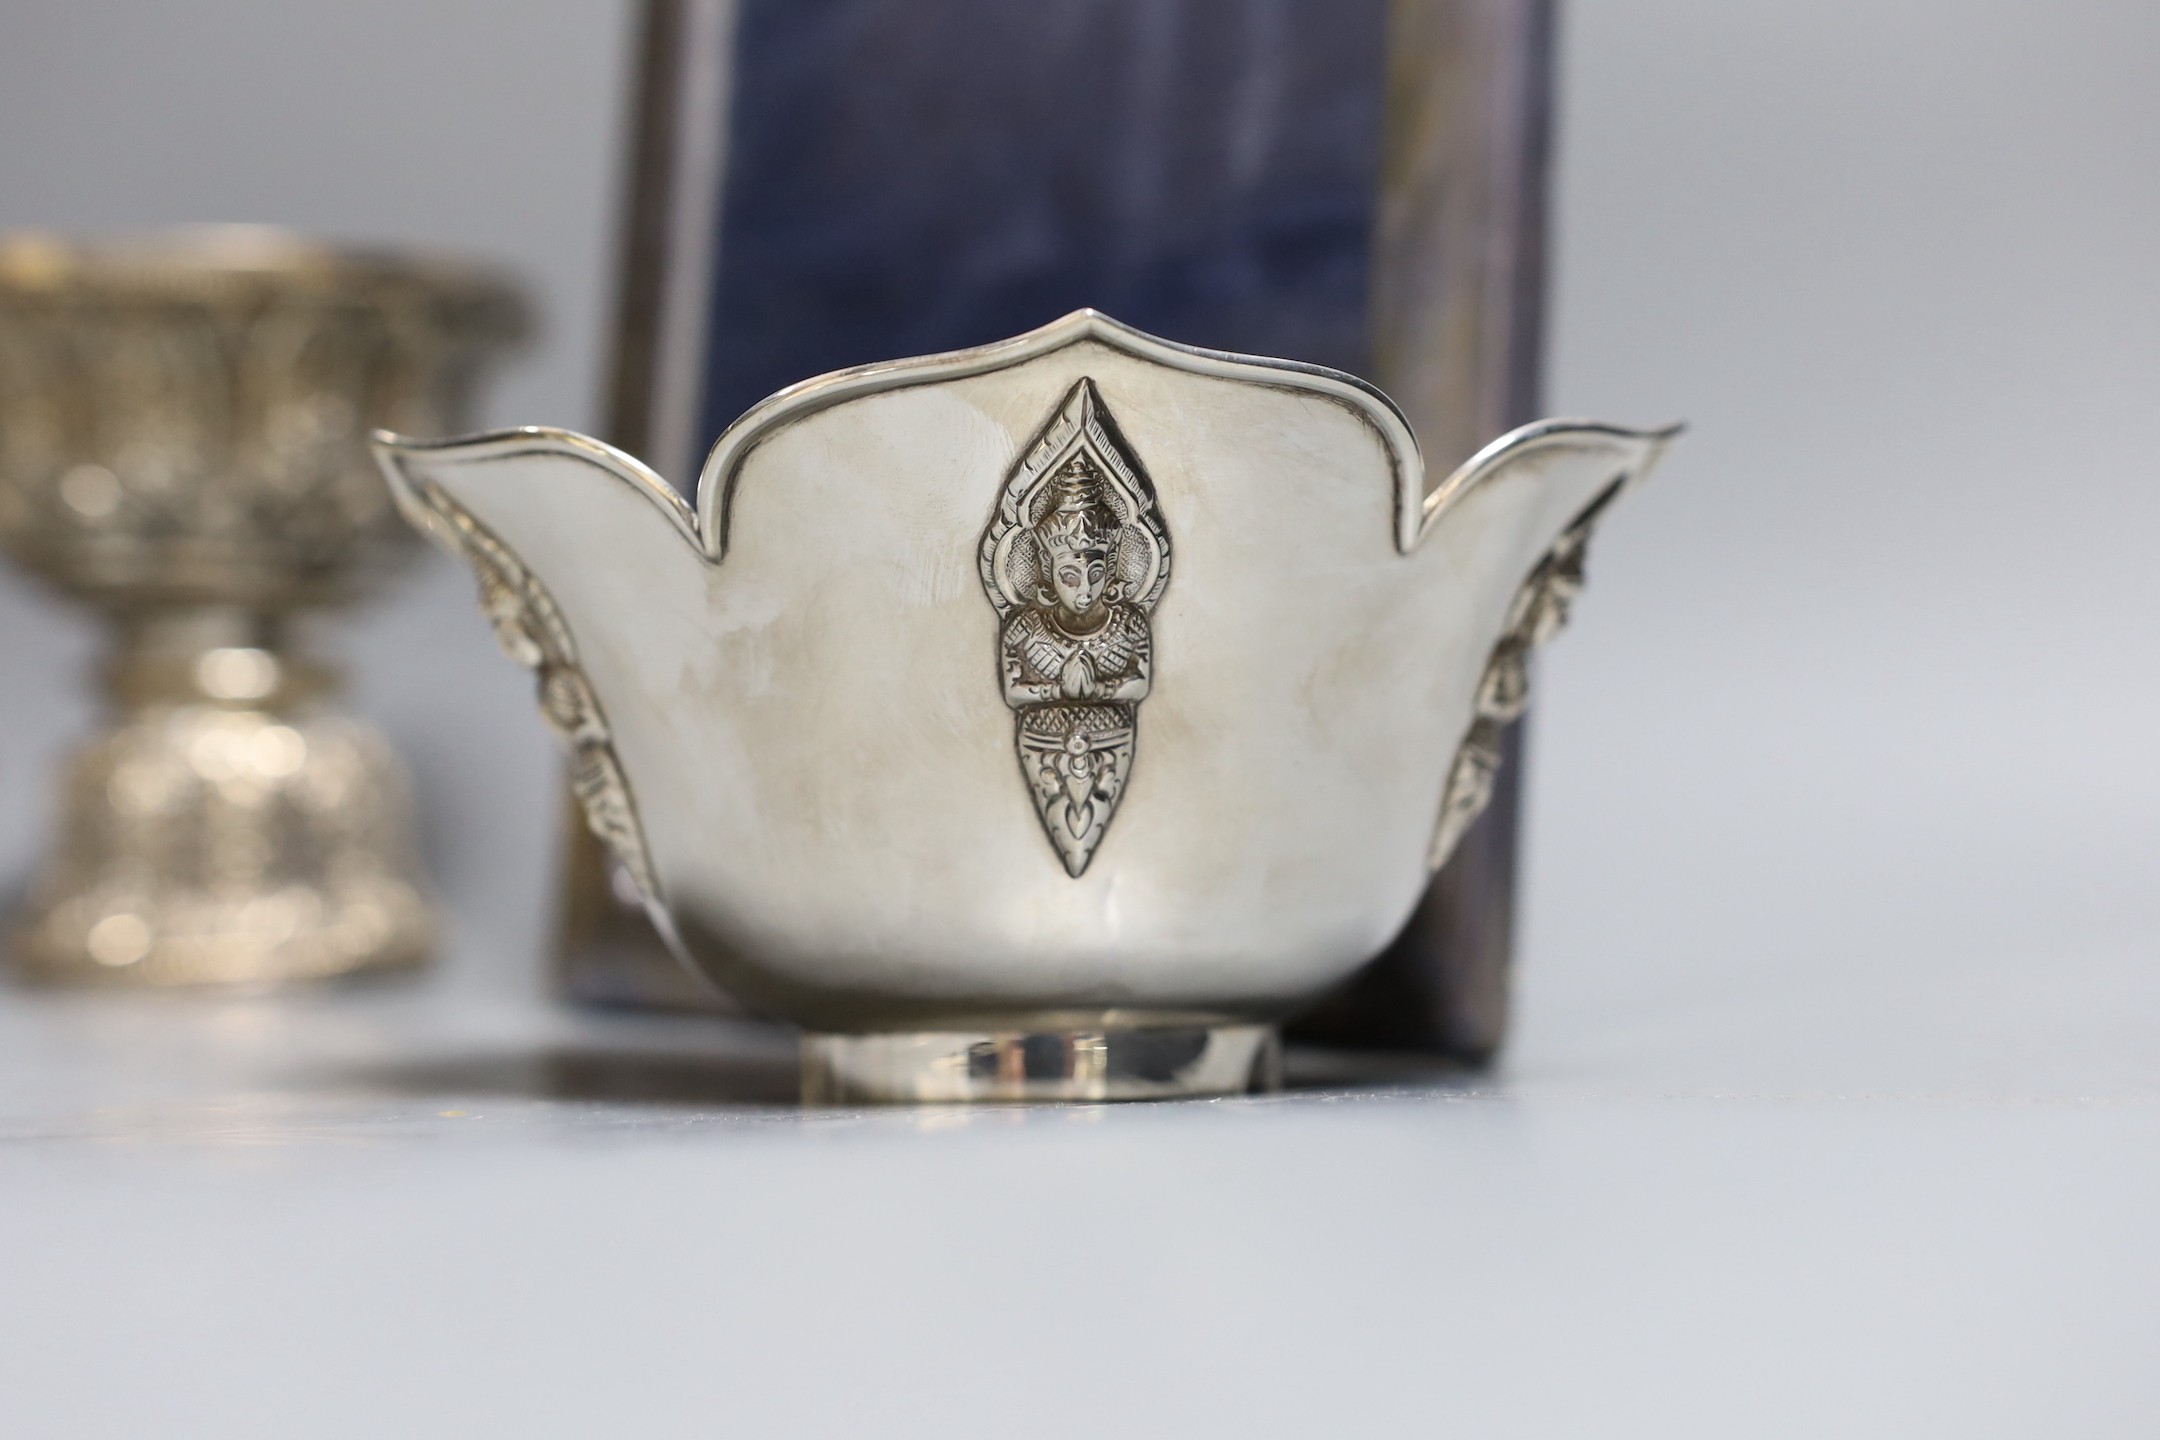 Six assorted embossed Thai white metal bowls, largest 18cm diam., and a silver photograph frame